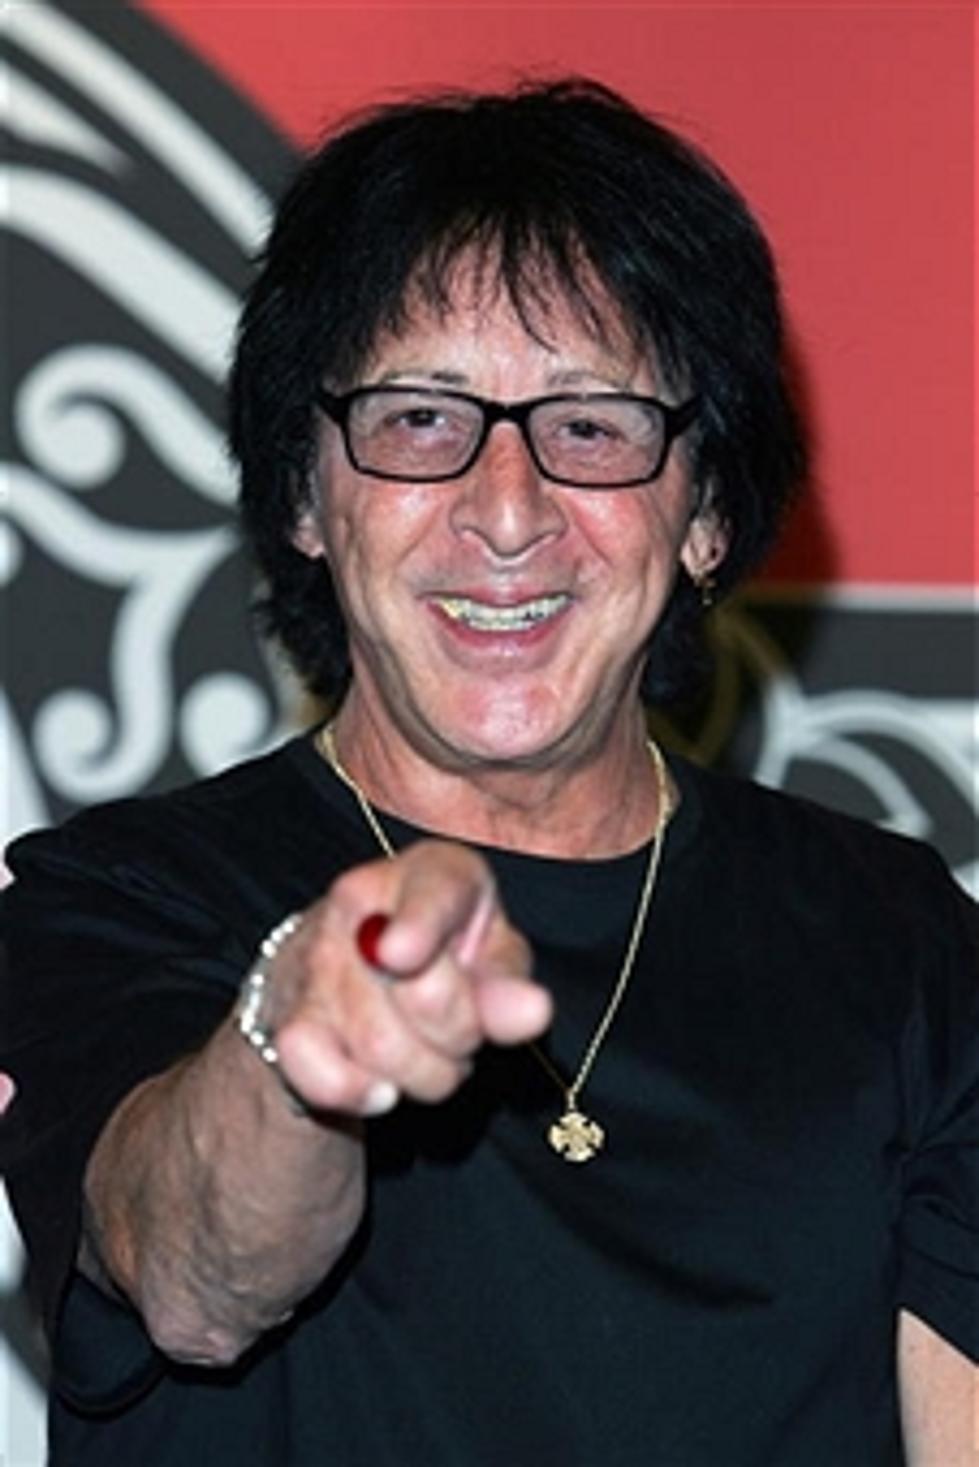 Happy Birthday to the “Catman” Peter Criss